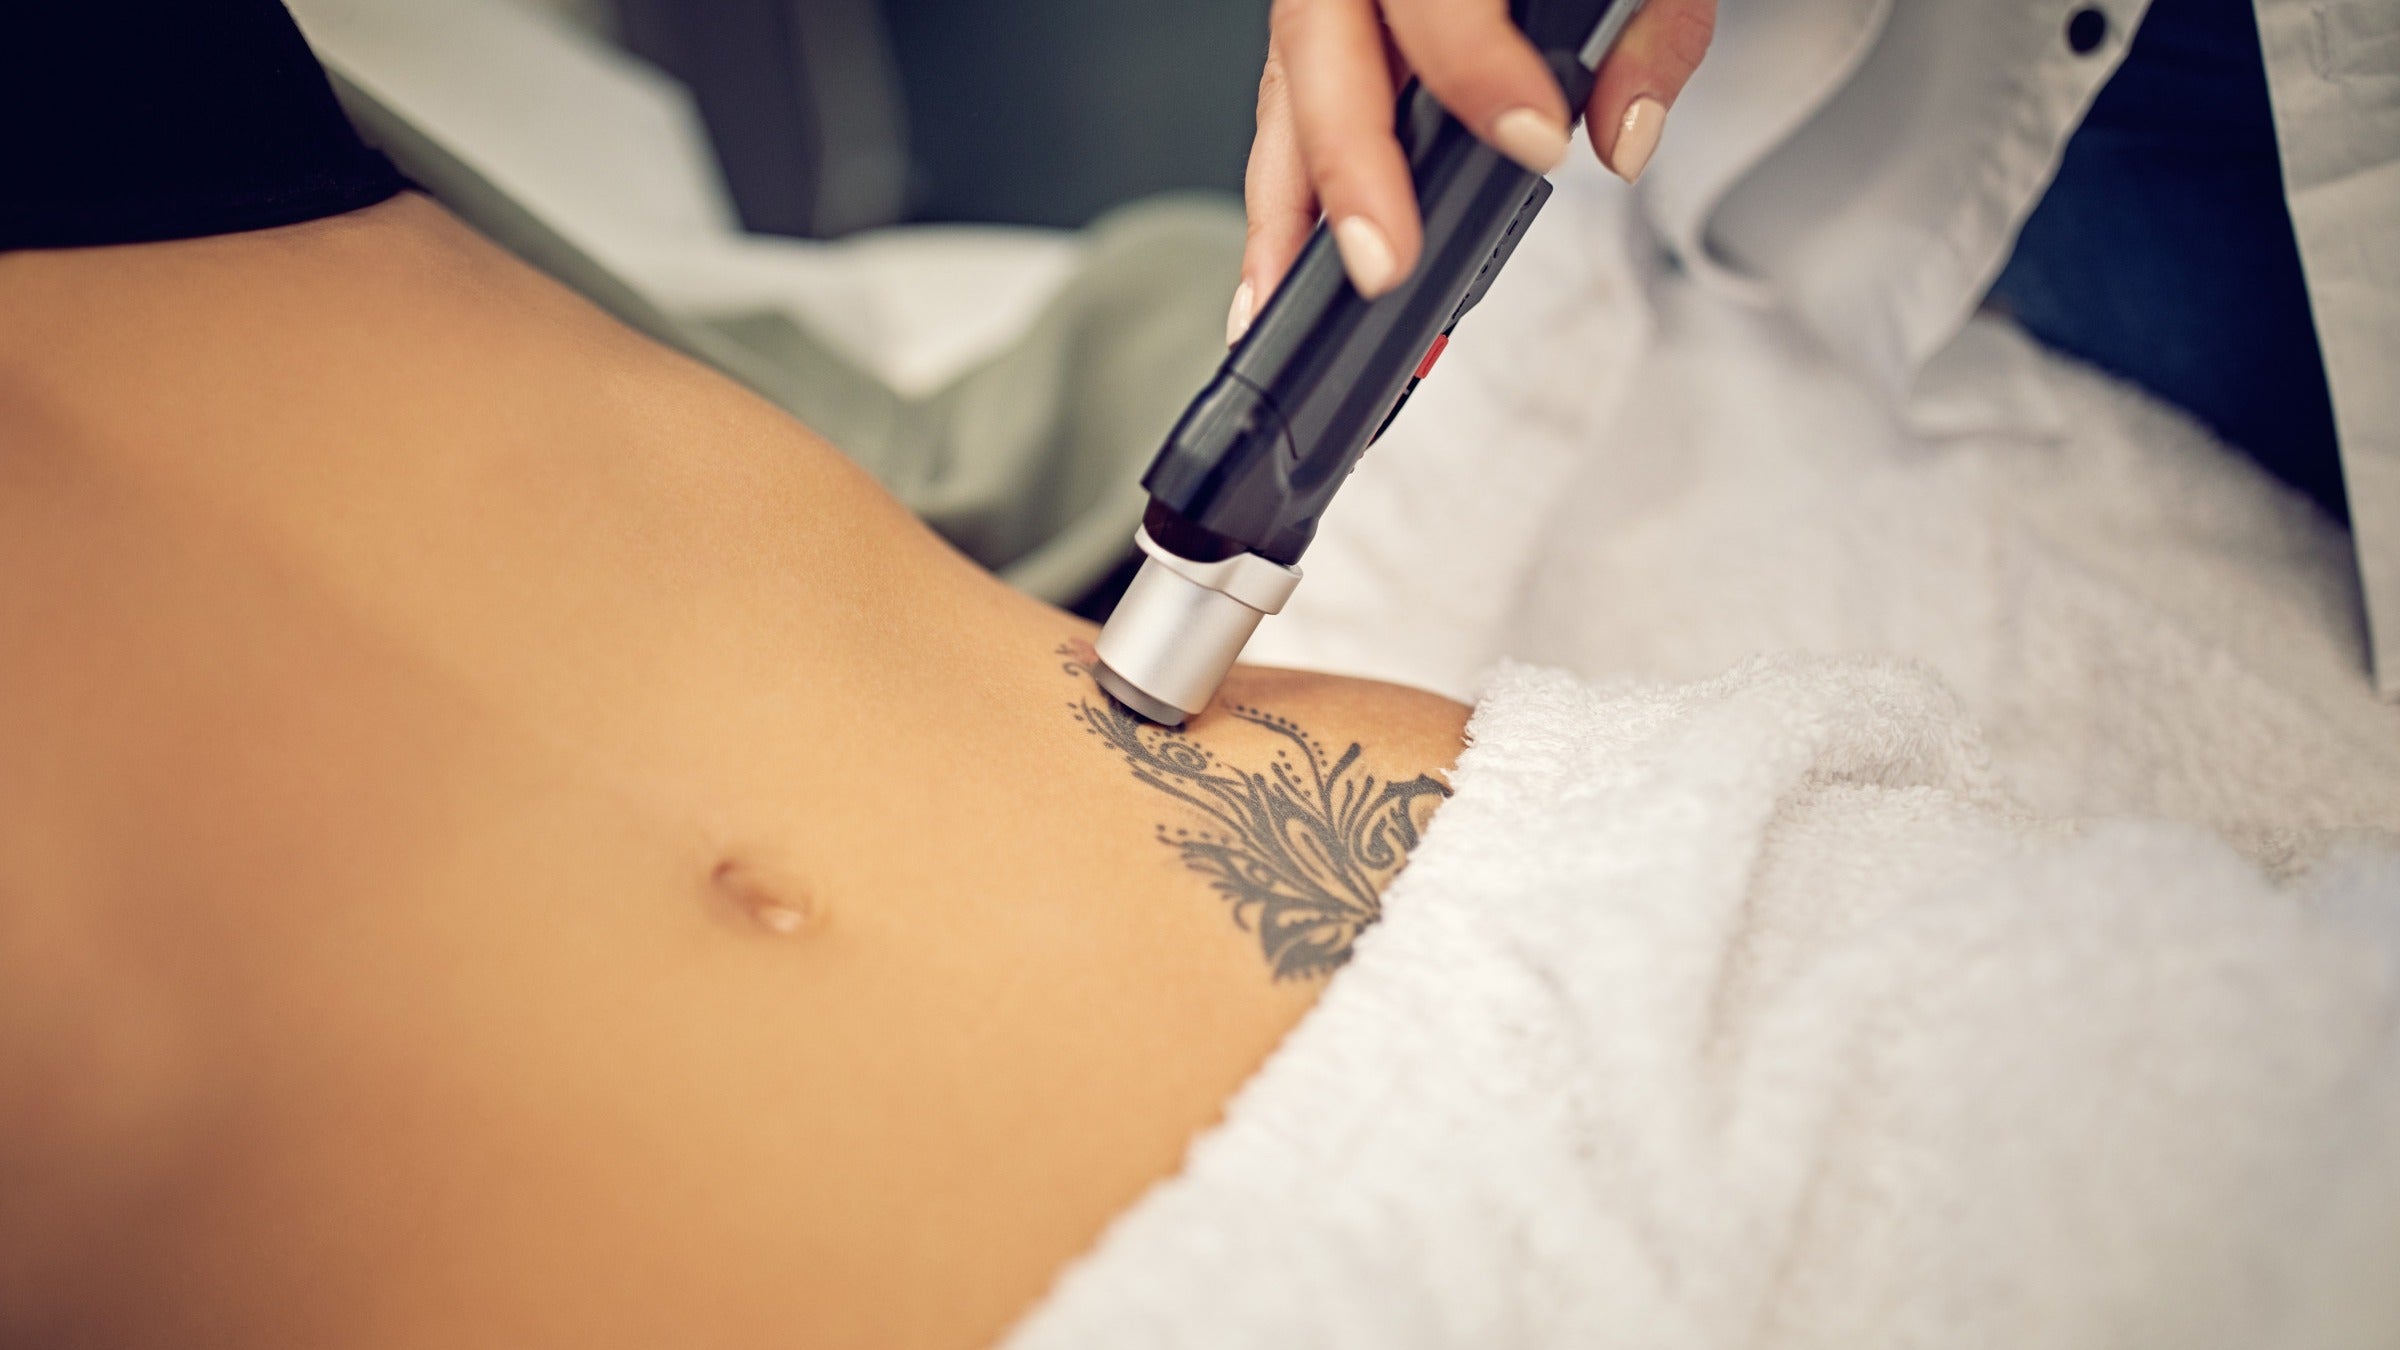 SHOULD YOU CONSIDER LASER TATTOO REMOVAL